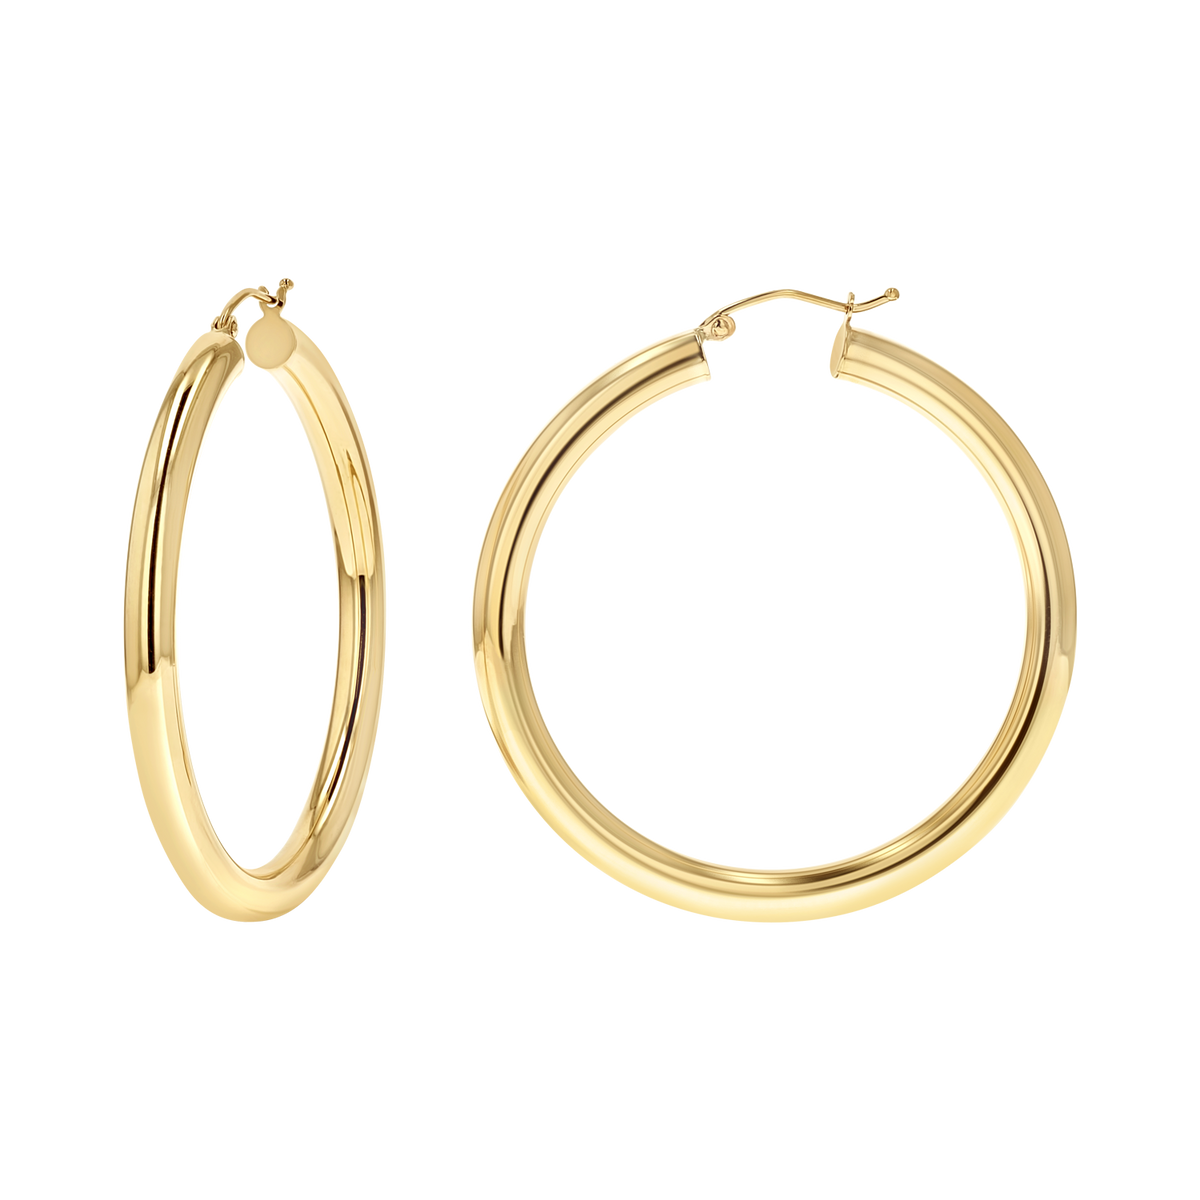 How to Put Hoop Earrings In: Tips and Advice